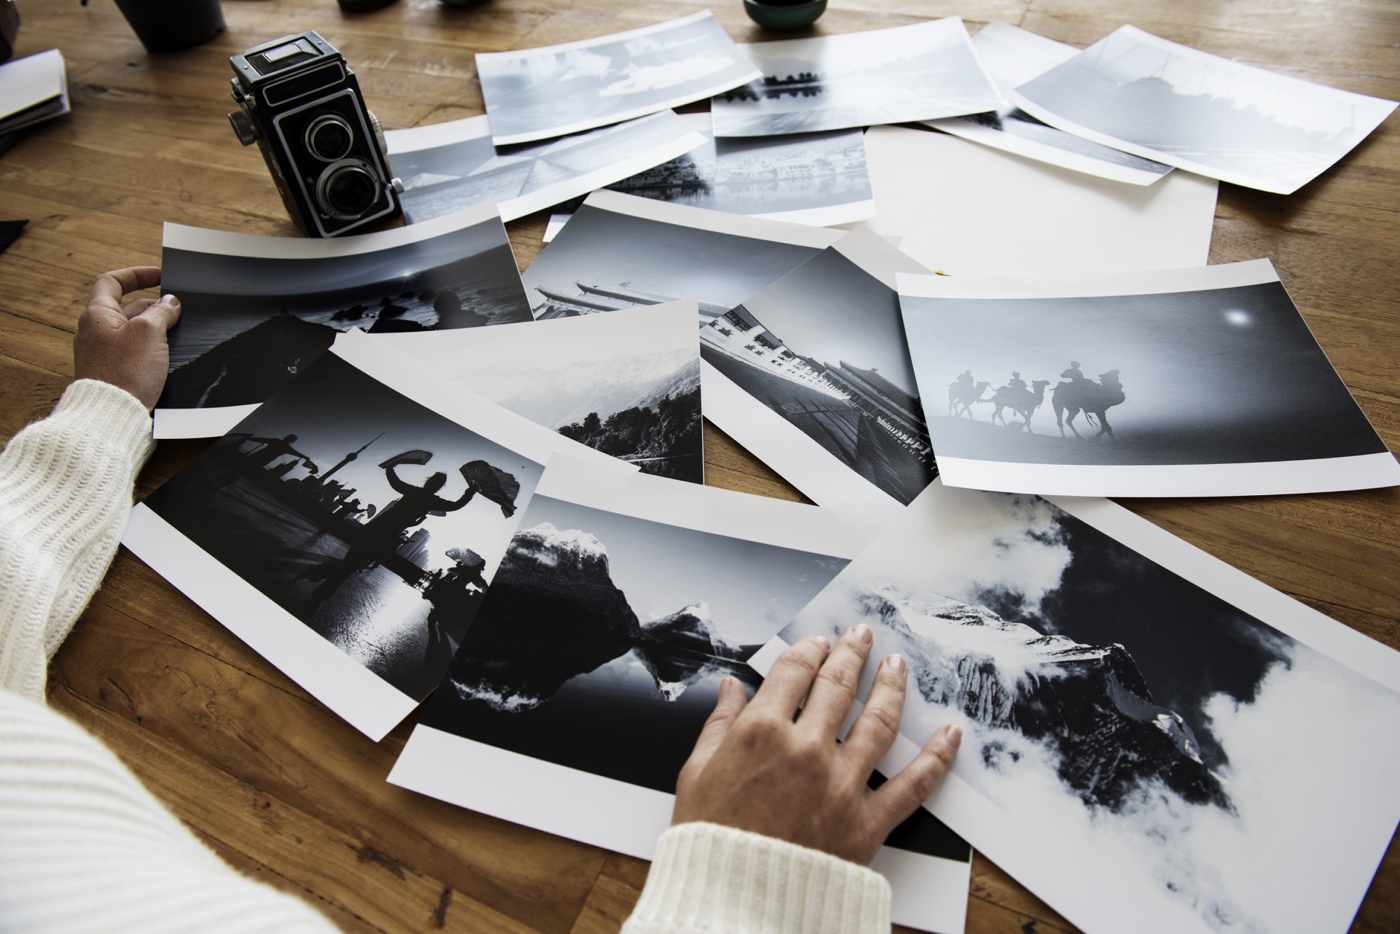 Design the perfect photo book: Choose black and white photos and arrange them stylishly